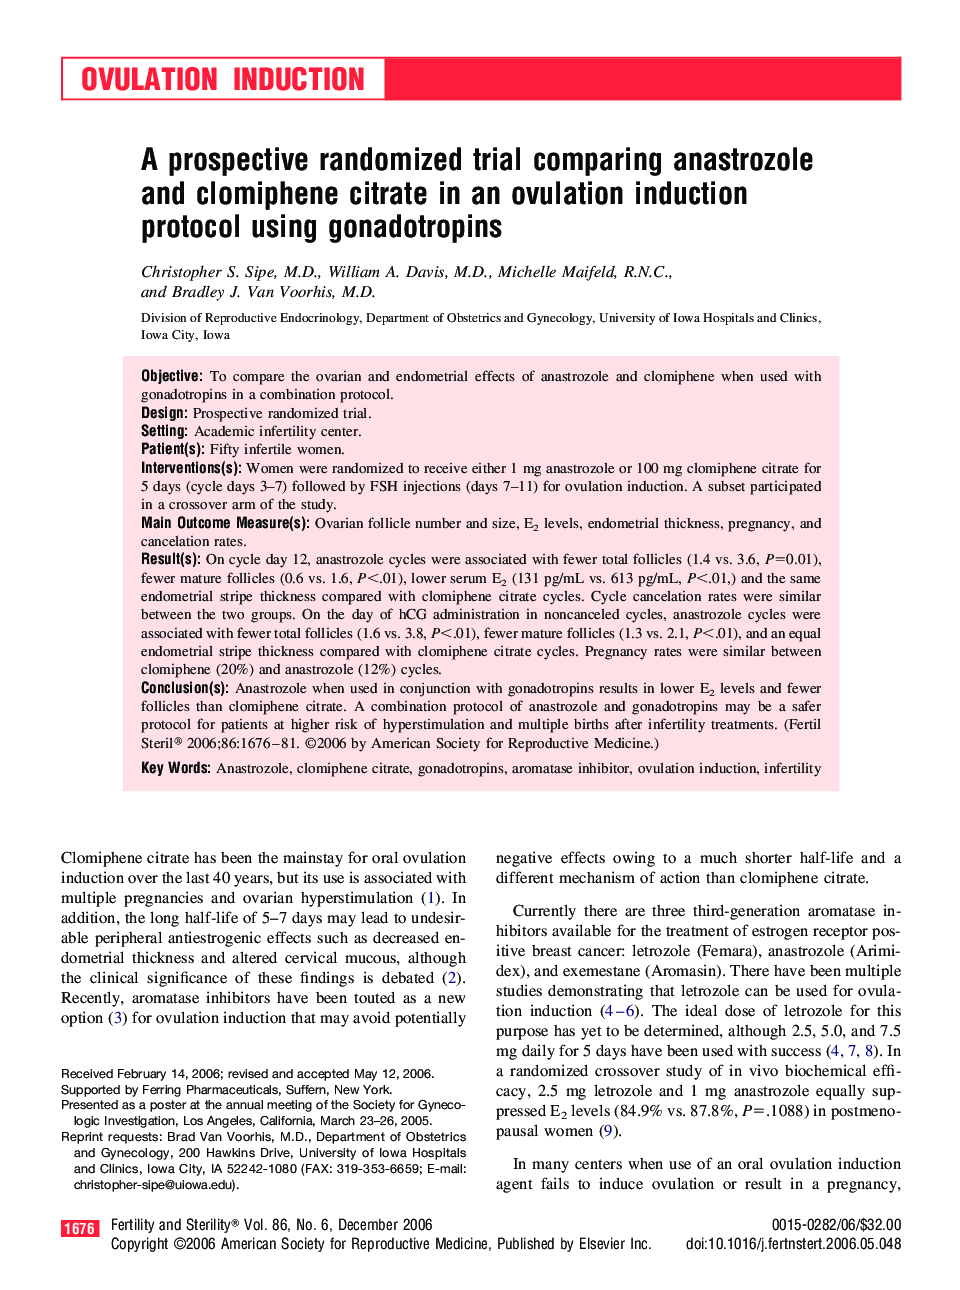 A prospective randomized trial comparing anastrozole and clomiphene citrate in an ovulation induction protocol using gonadotropins 